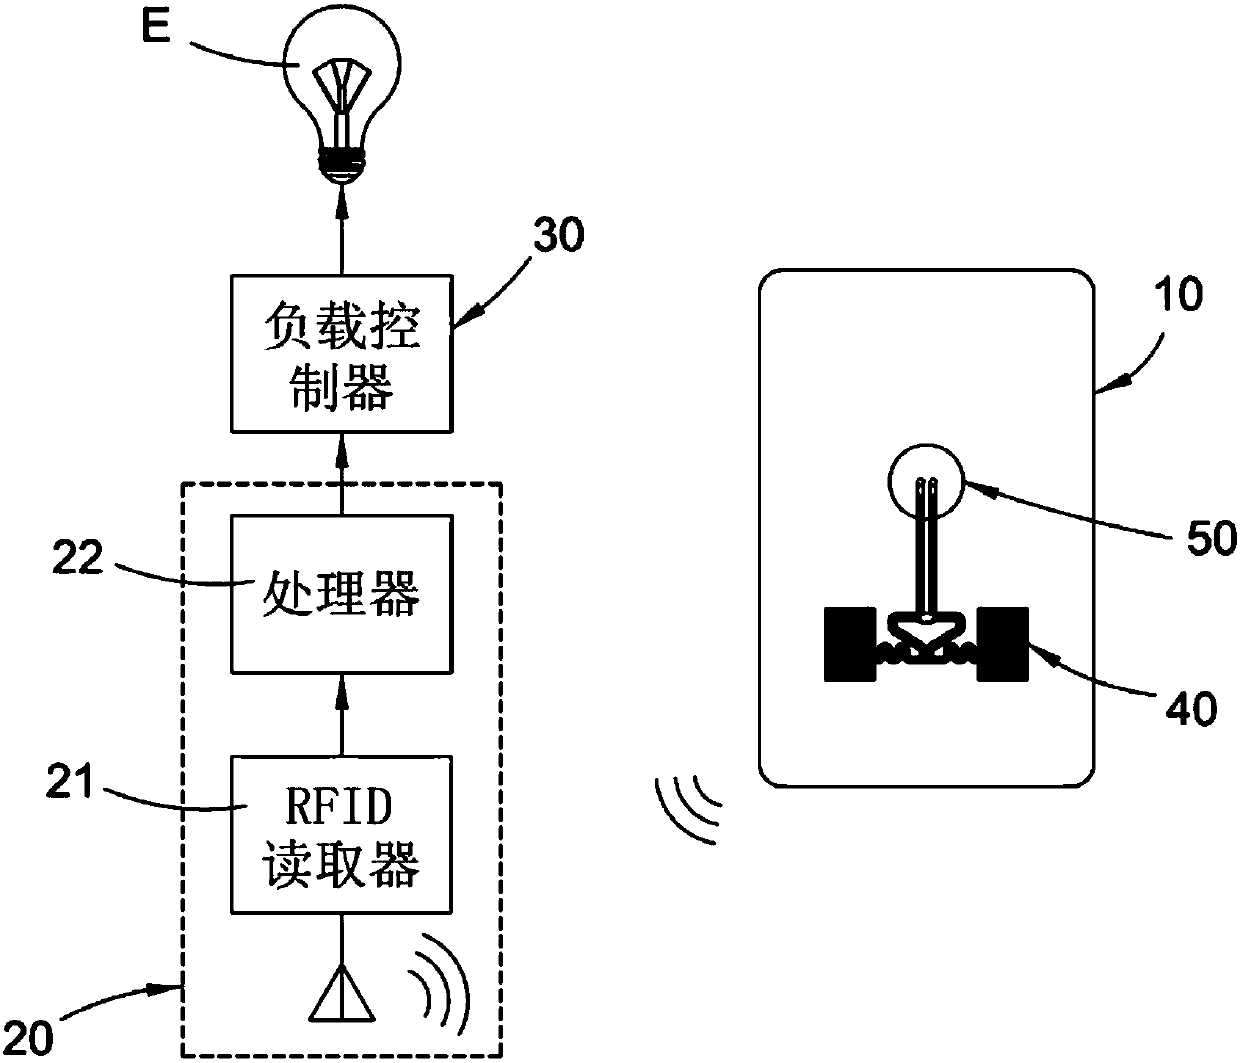 RFID-based electric appliance remote control device